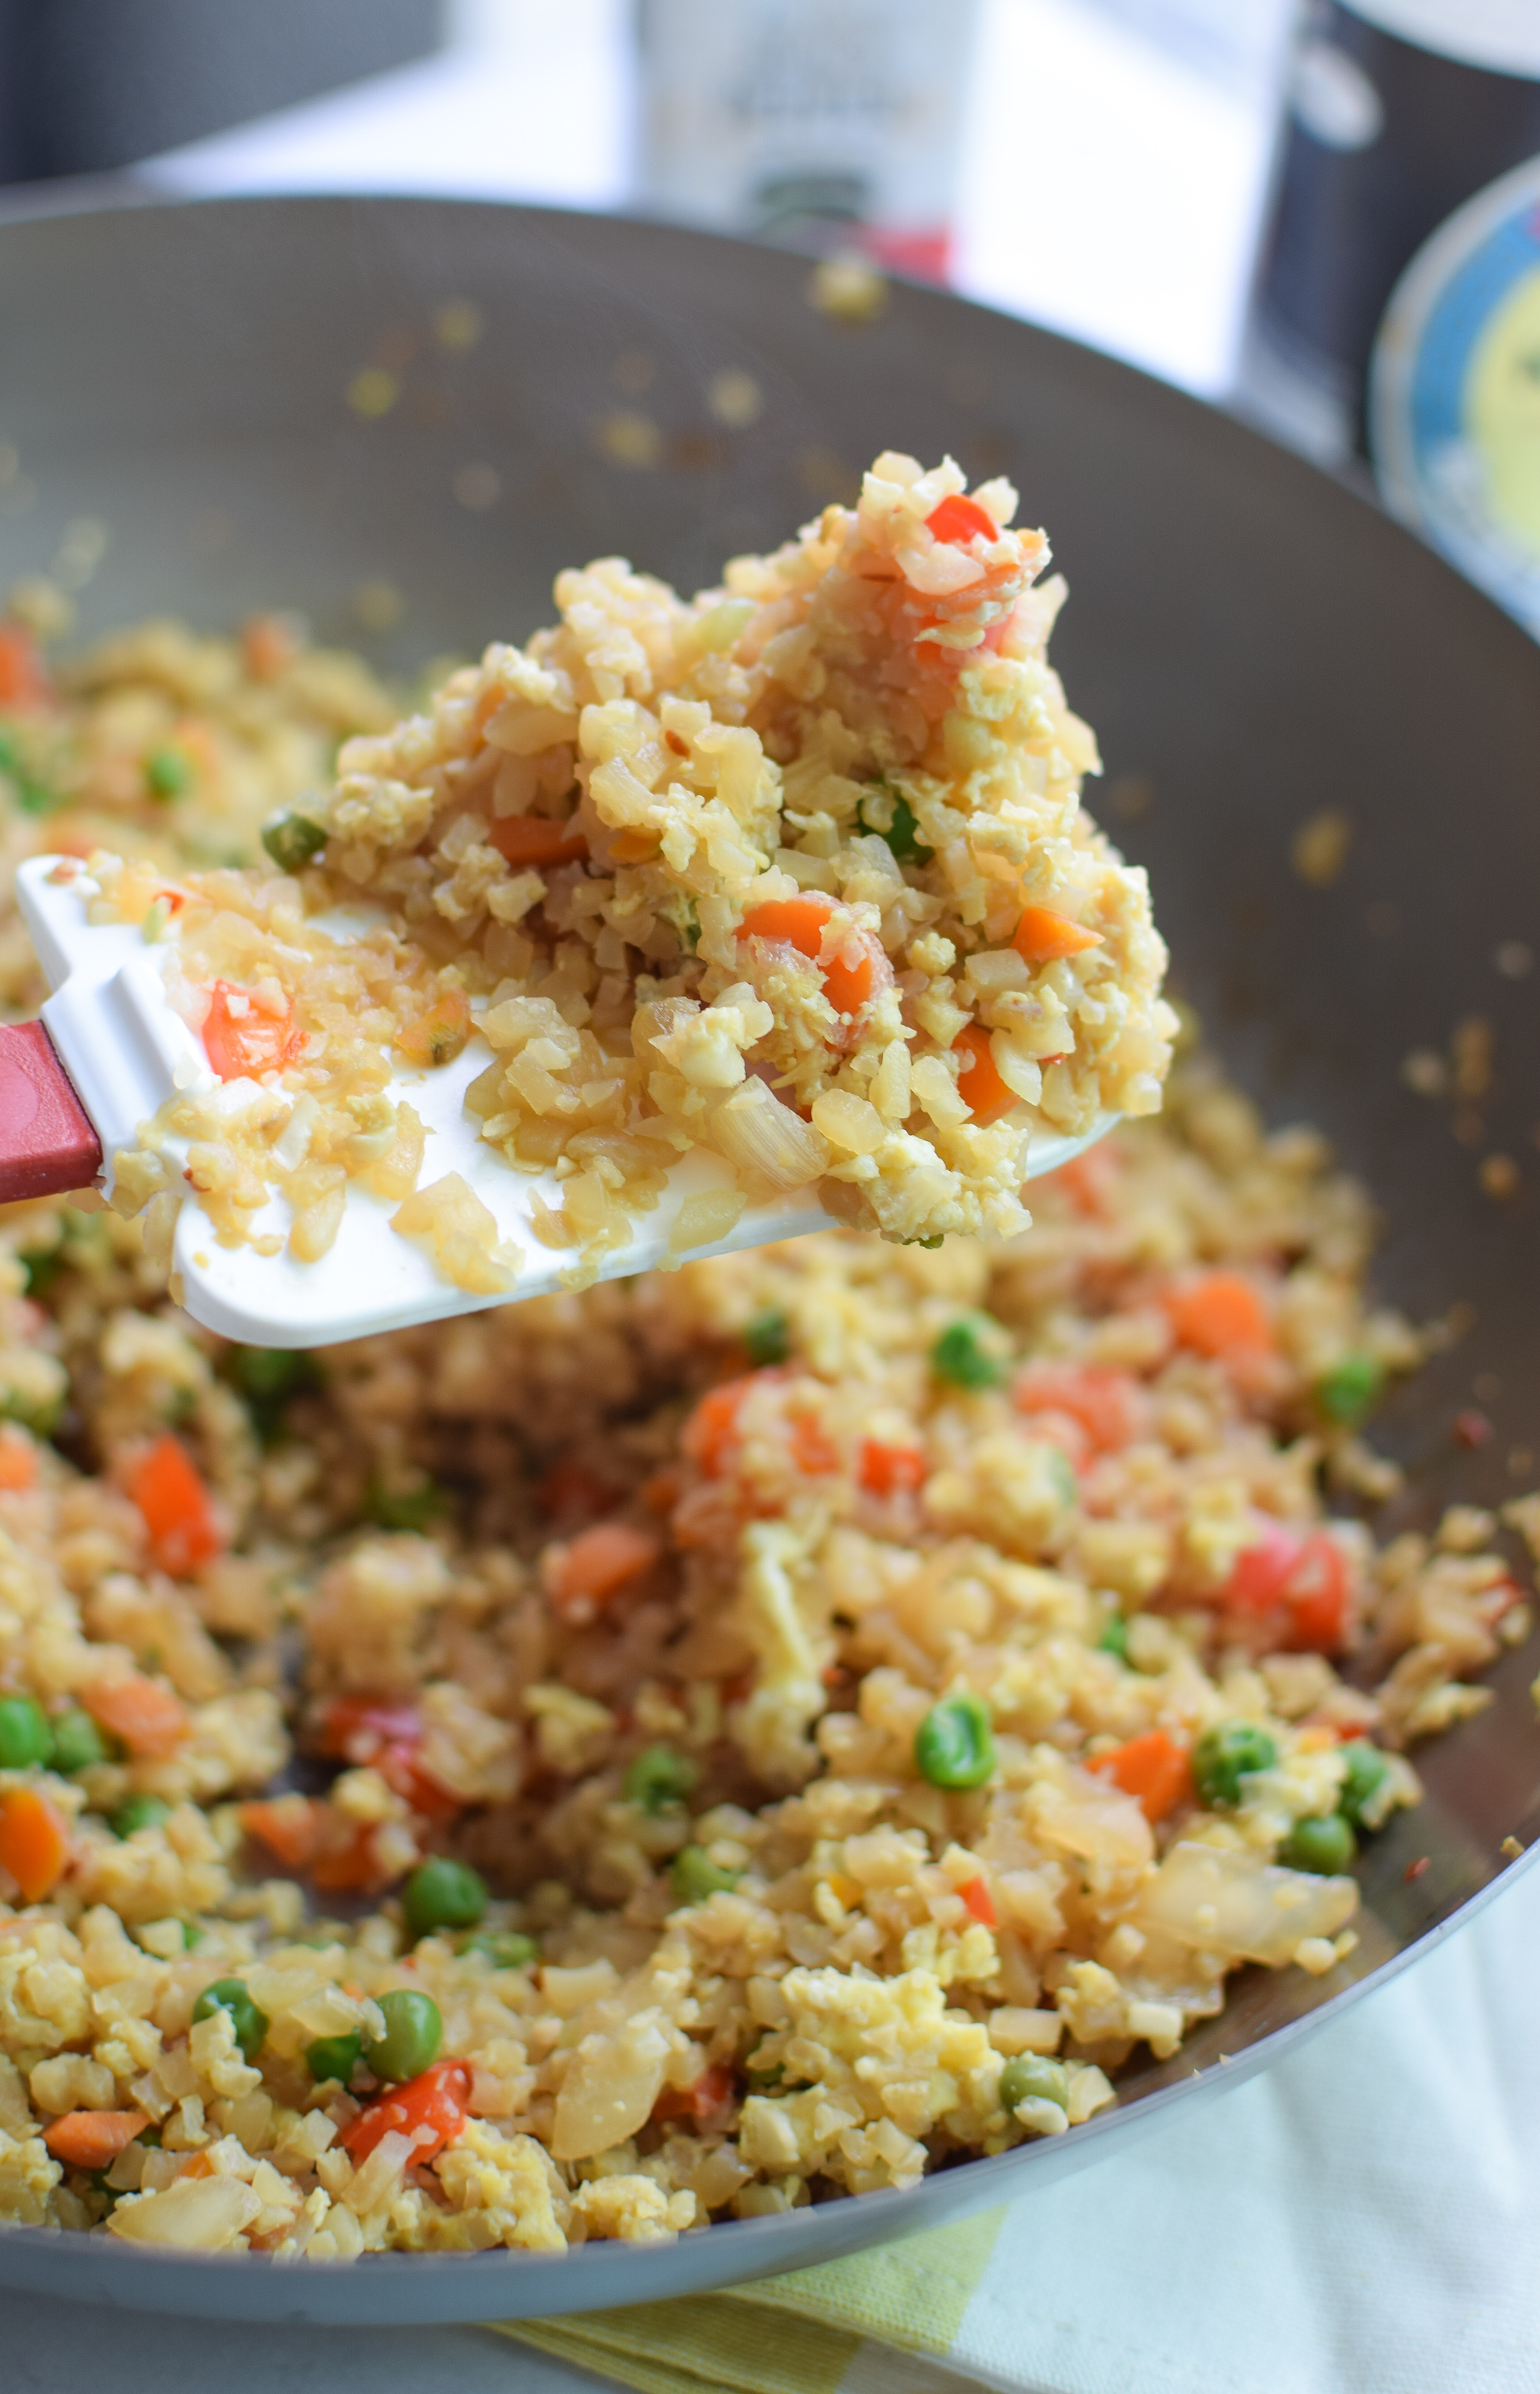 Fried Cauliflower Rice Recipe - Super healthy takeout style fried "rice", made with cauliflower! Packed with veggies and easy to personalize. - ProjectMealPlan.com